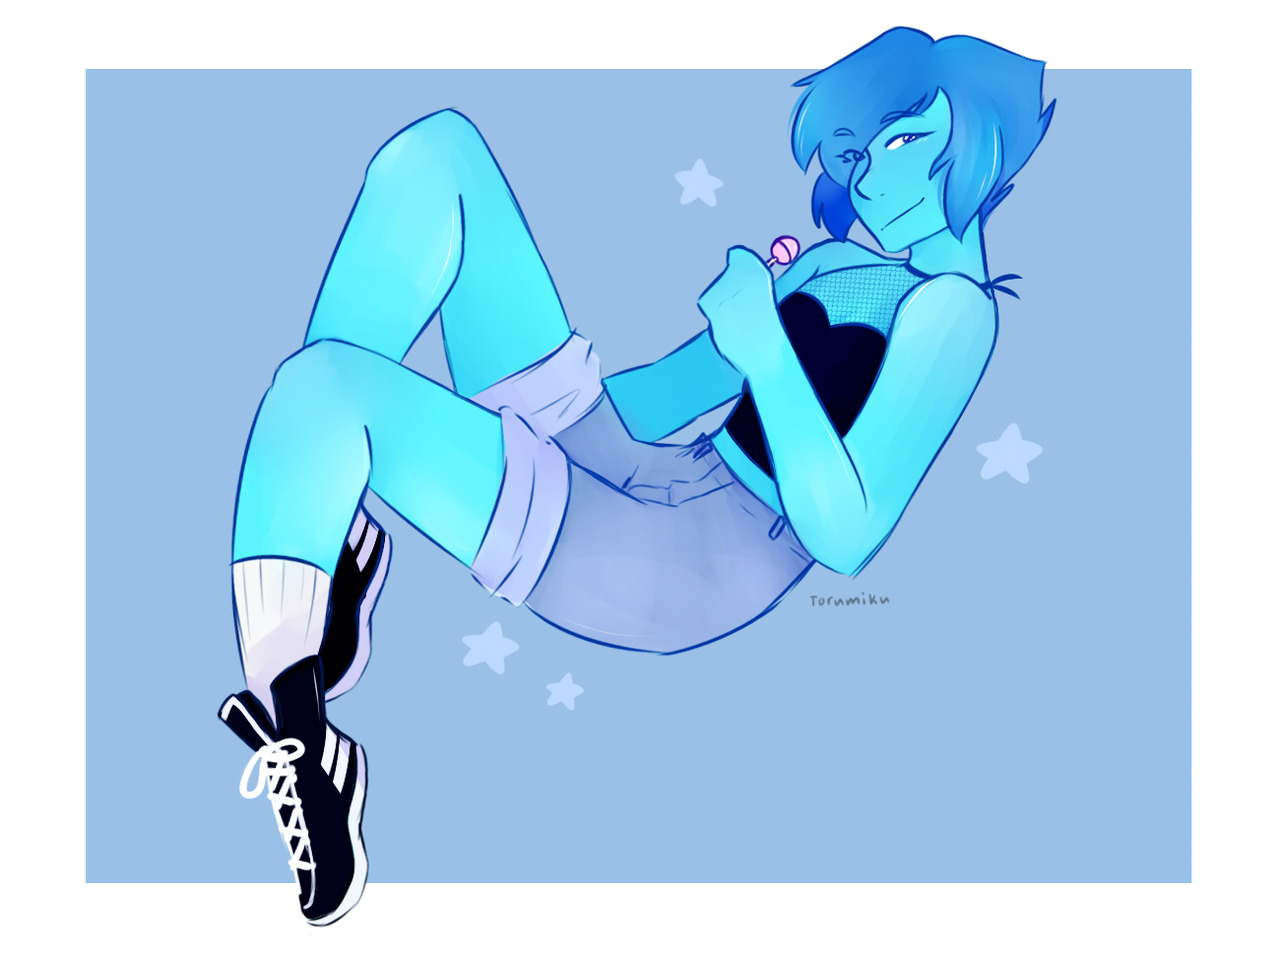 Felt like drawing Lapis from SU so here’s a quick sketch of her!!! I honestly really like this one!